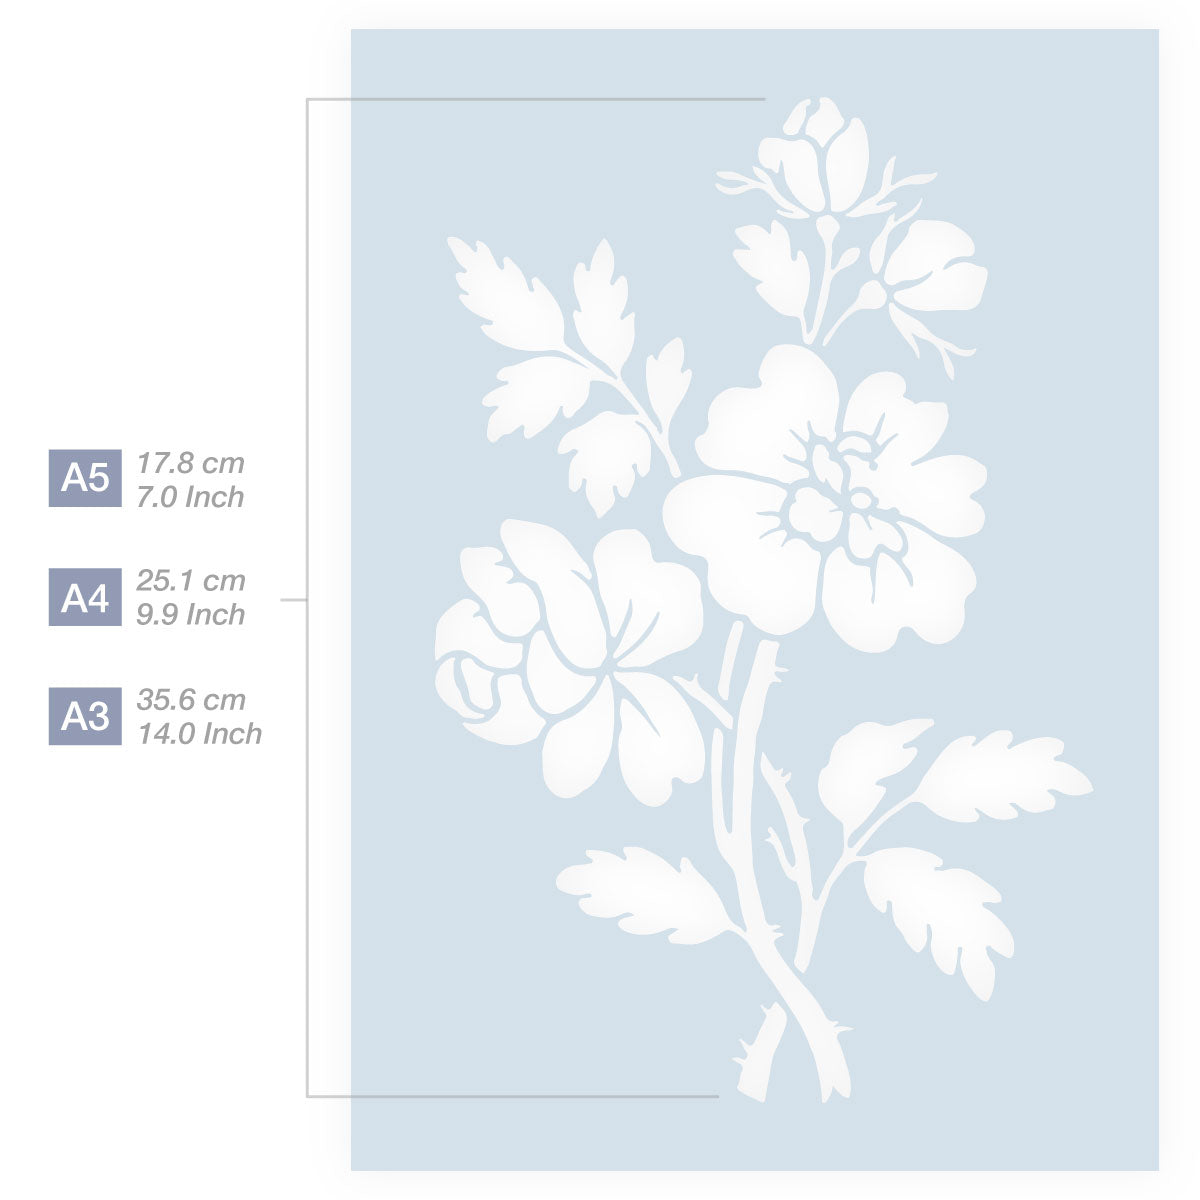 Reusable Wild Flowers Stencil, Flower Stencils for Painting